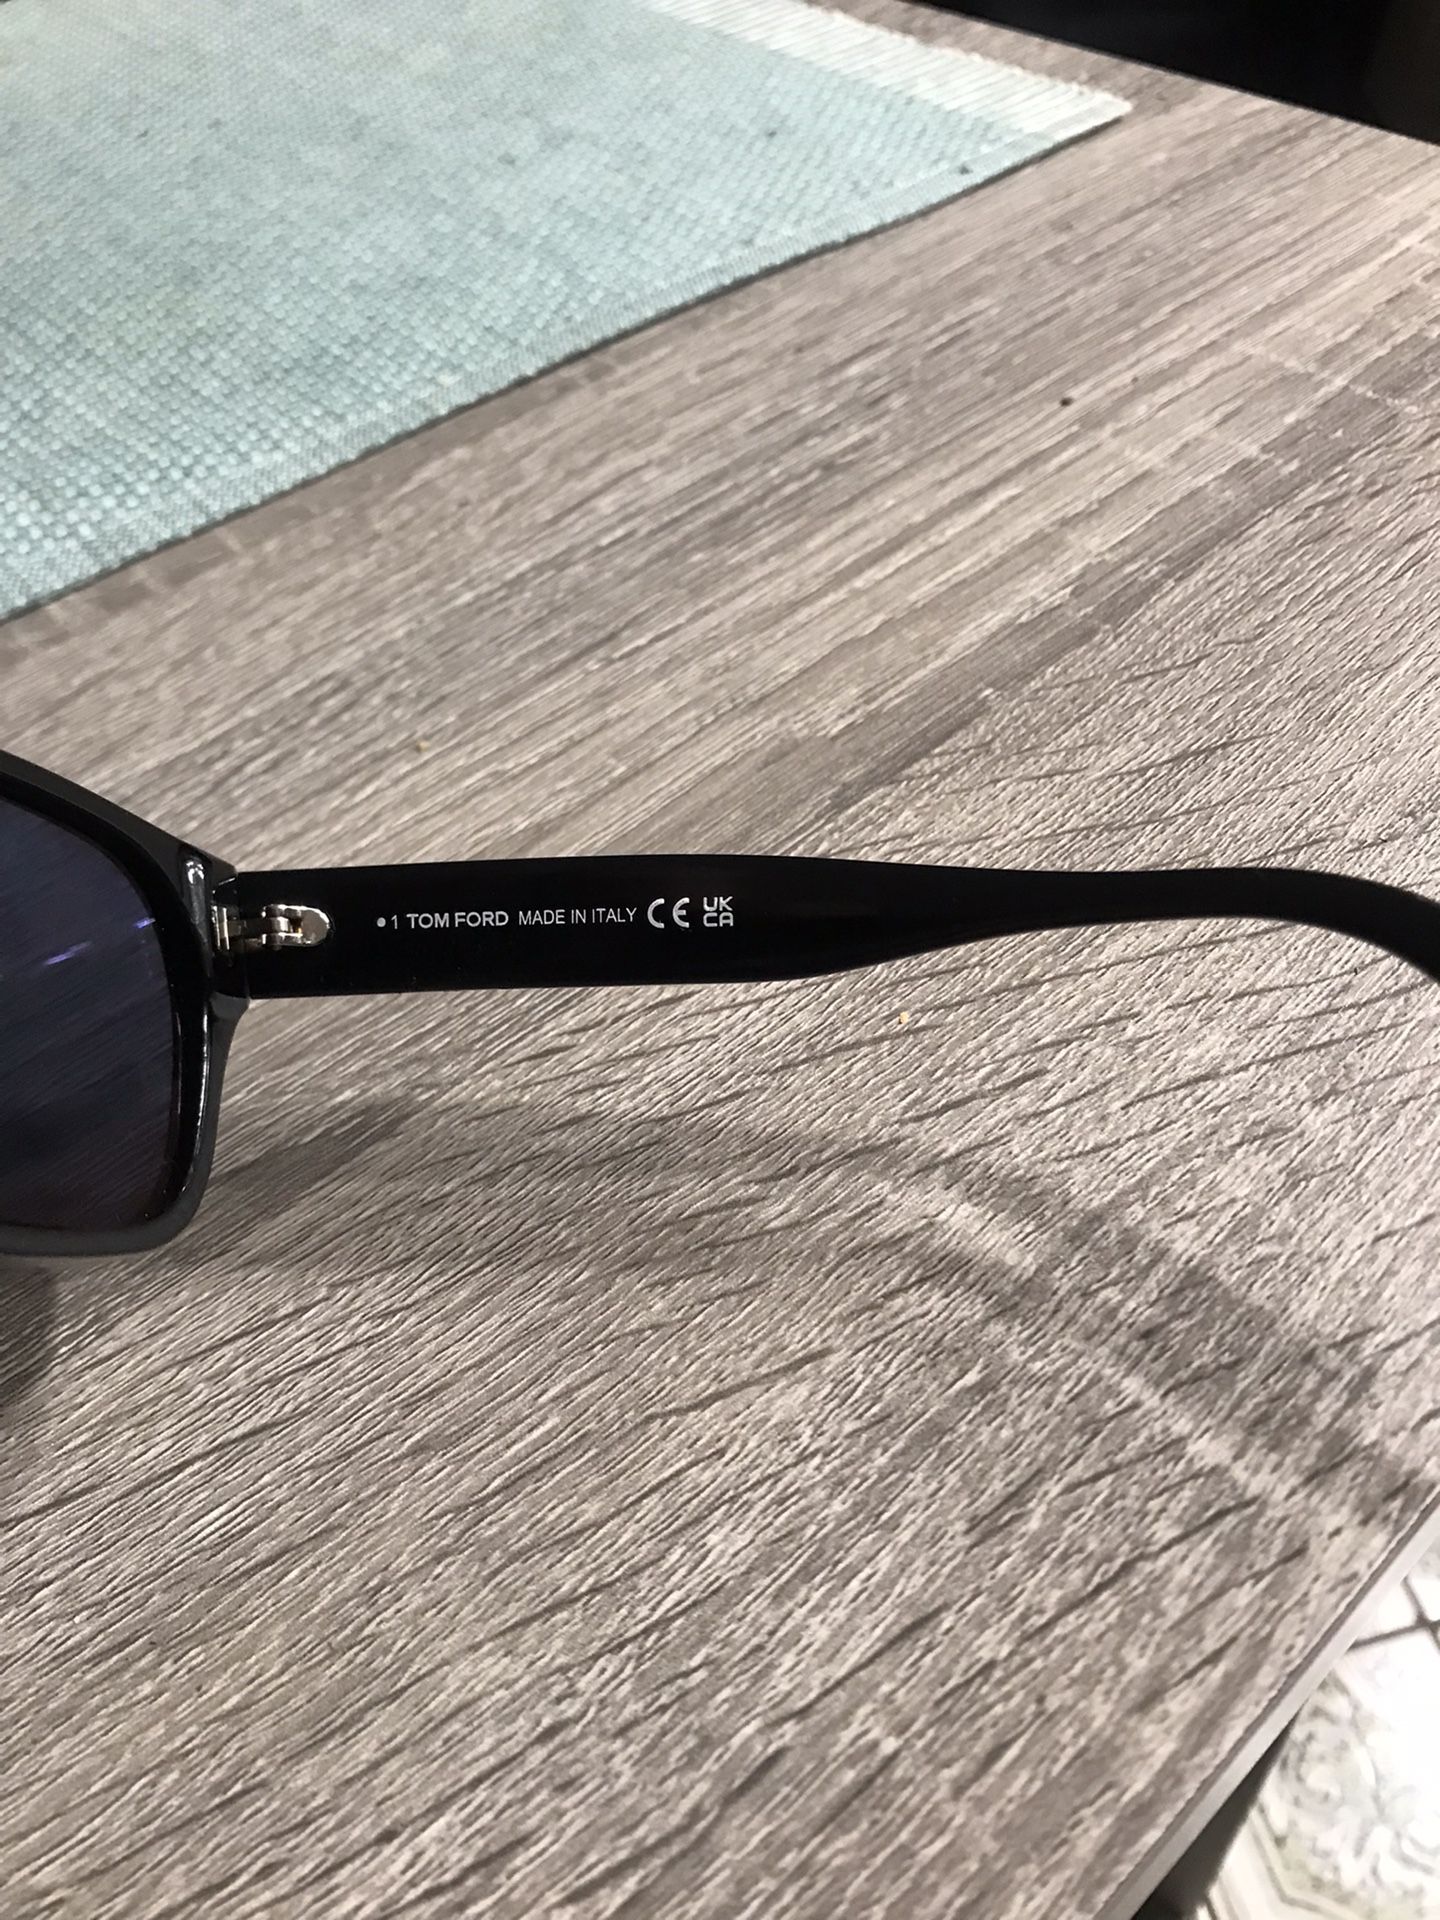 Tom Ford Sunglasses For Cheap!!!!!!